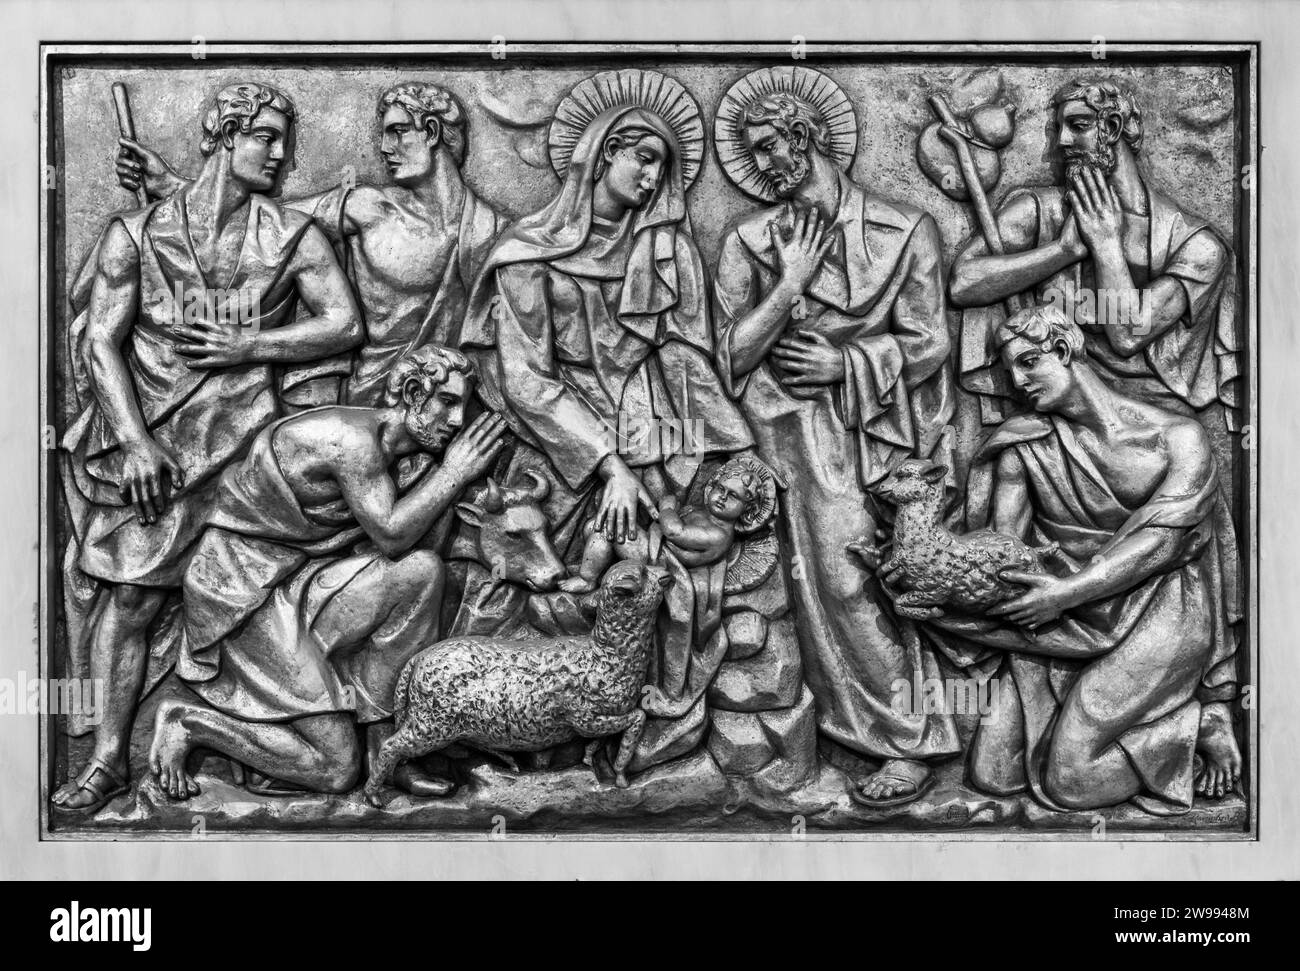 The Nativity of Jesus in Bethlehem – Third Joyful Mystery. A relief sculpture in the Basilica of Our Lady of the Rosary of Fatima. Stock Photo